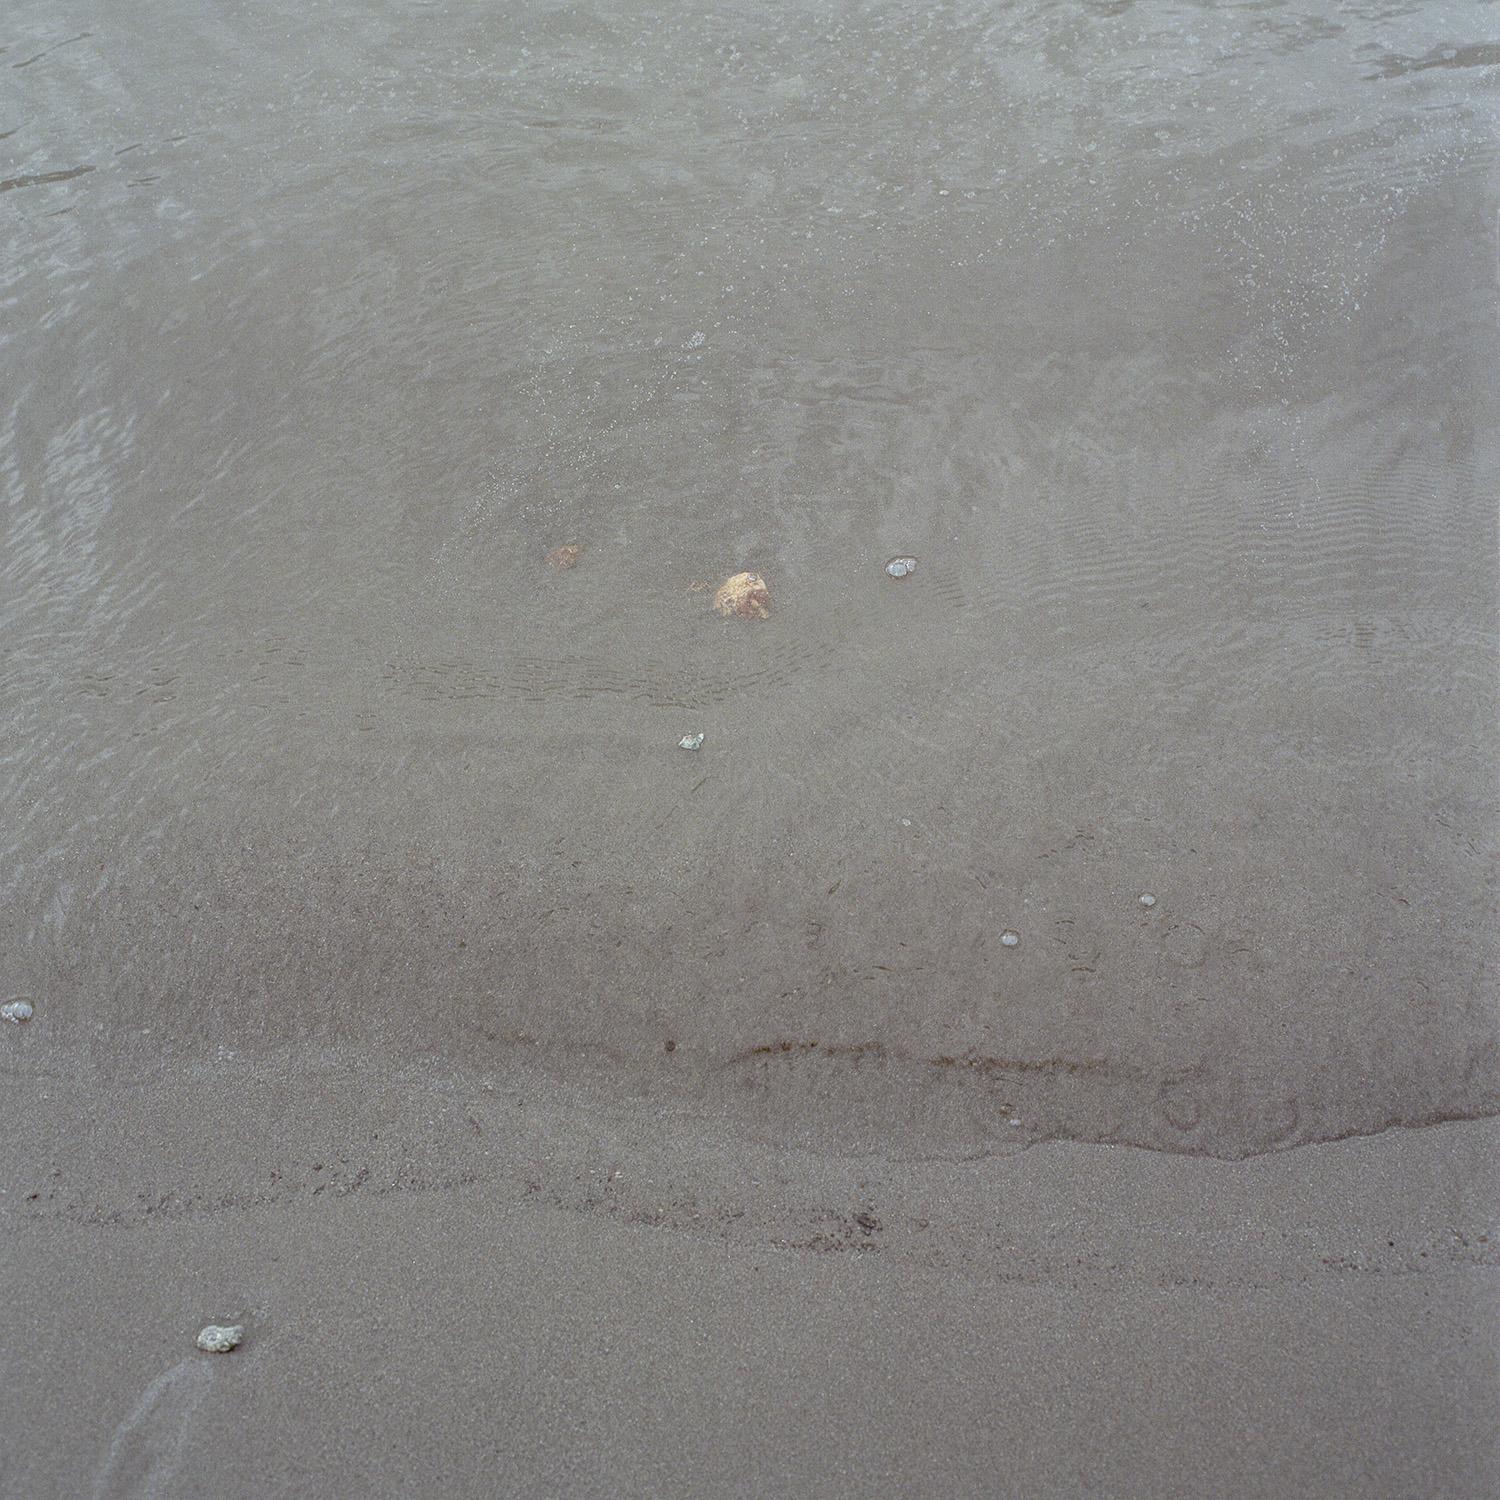 Close up photograph of grey sand with pebbles amongst the sand and water lightly washing over it.